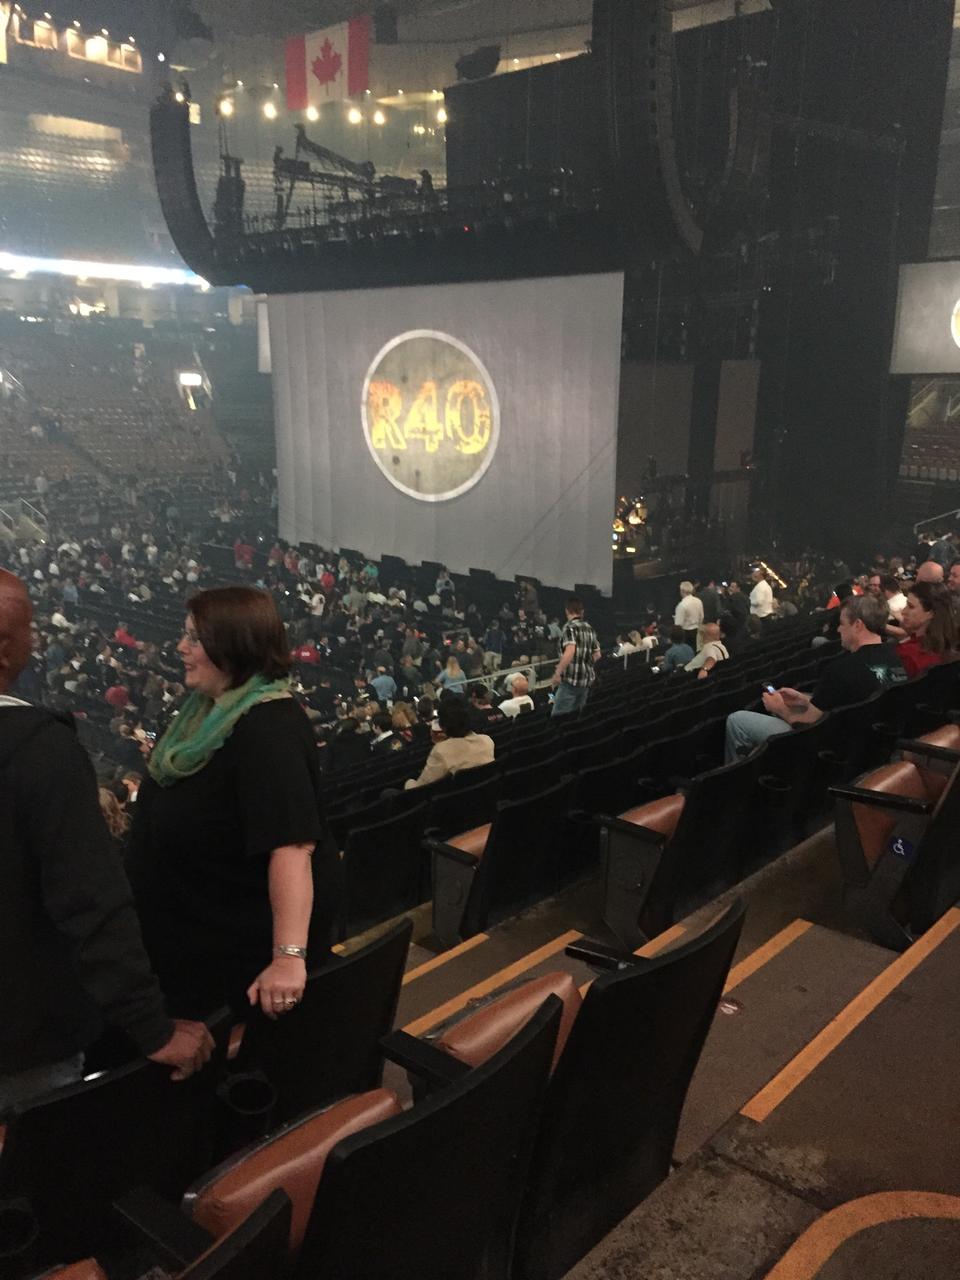 section 120, row 20 seat view  for concert - scotiabank arena